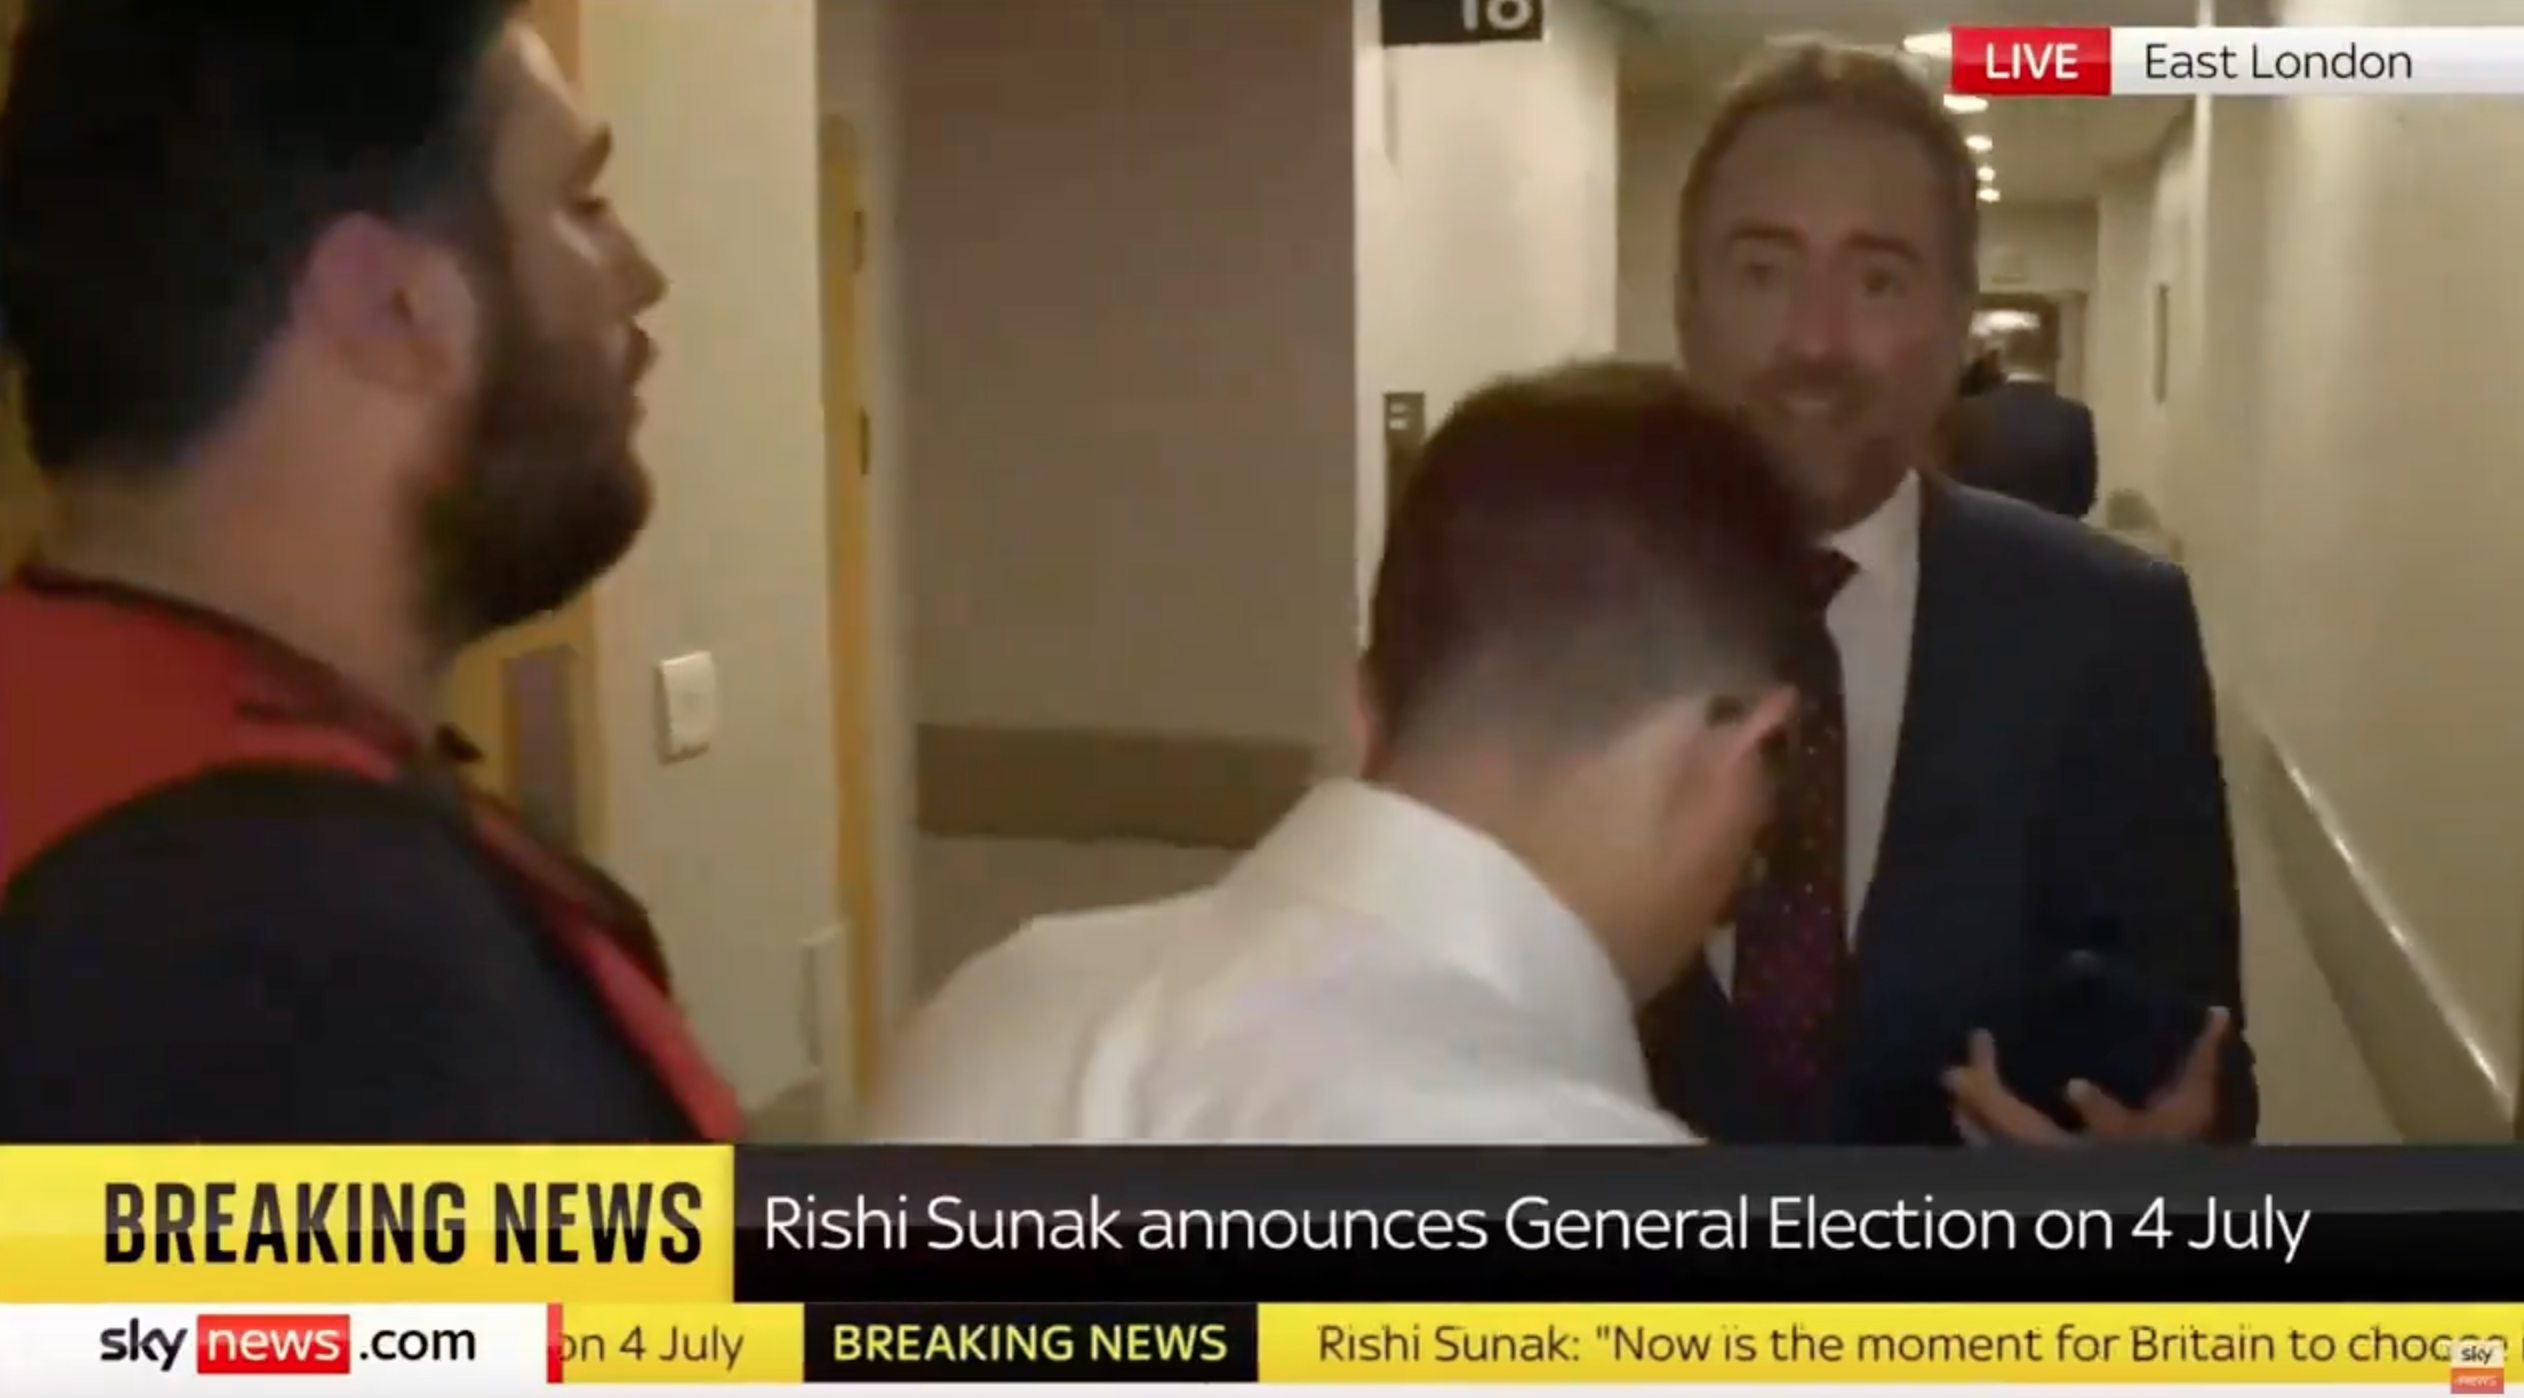 Sky News Journalist ‘Forcibly Removed’ From Tory Party Election Campaign Launch During Broadcast